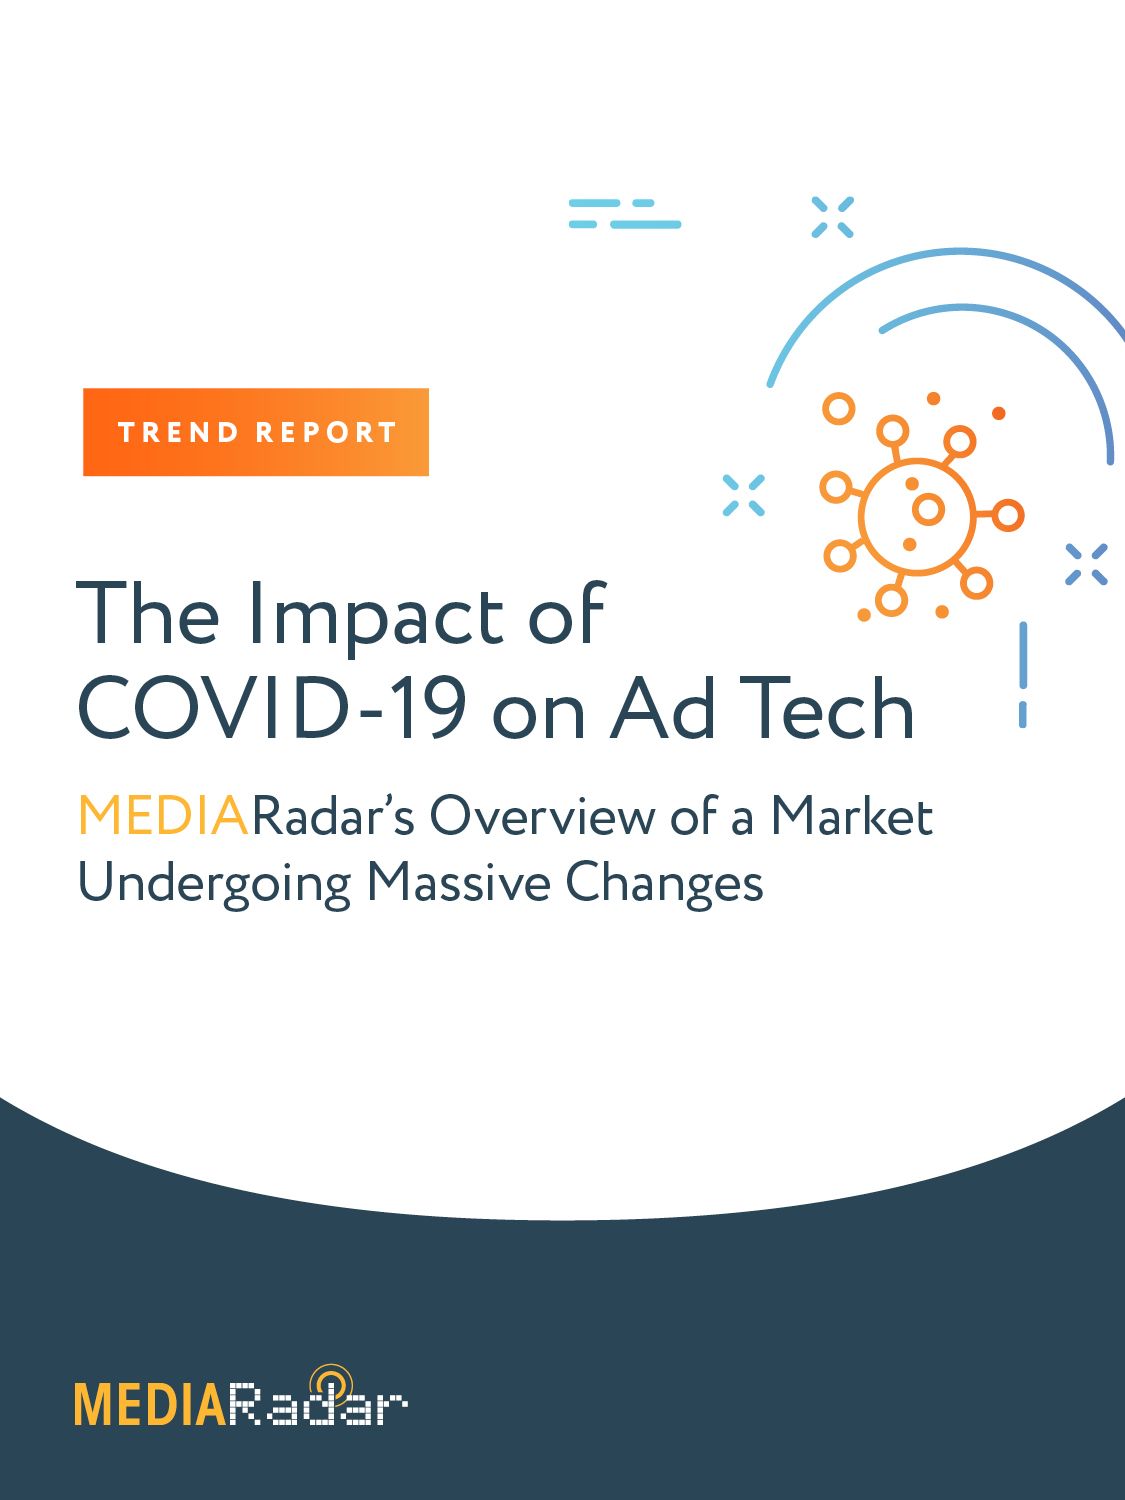 The Impact of COVID-19 on Ad Tech